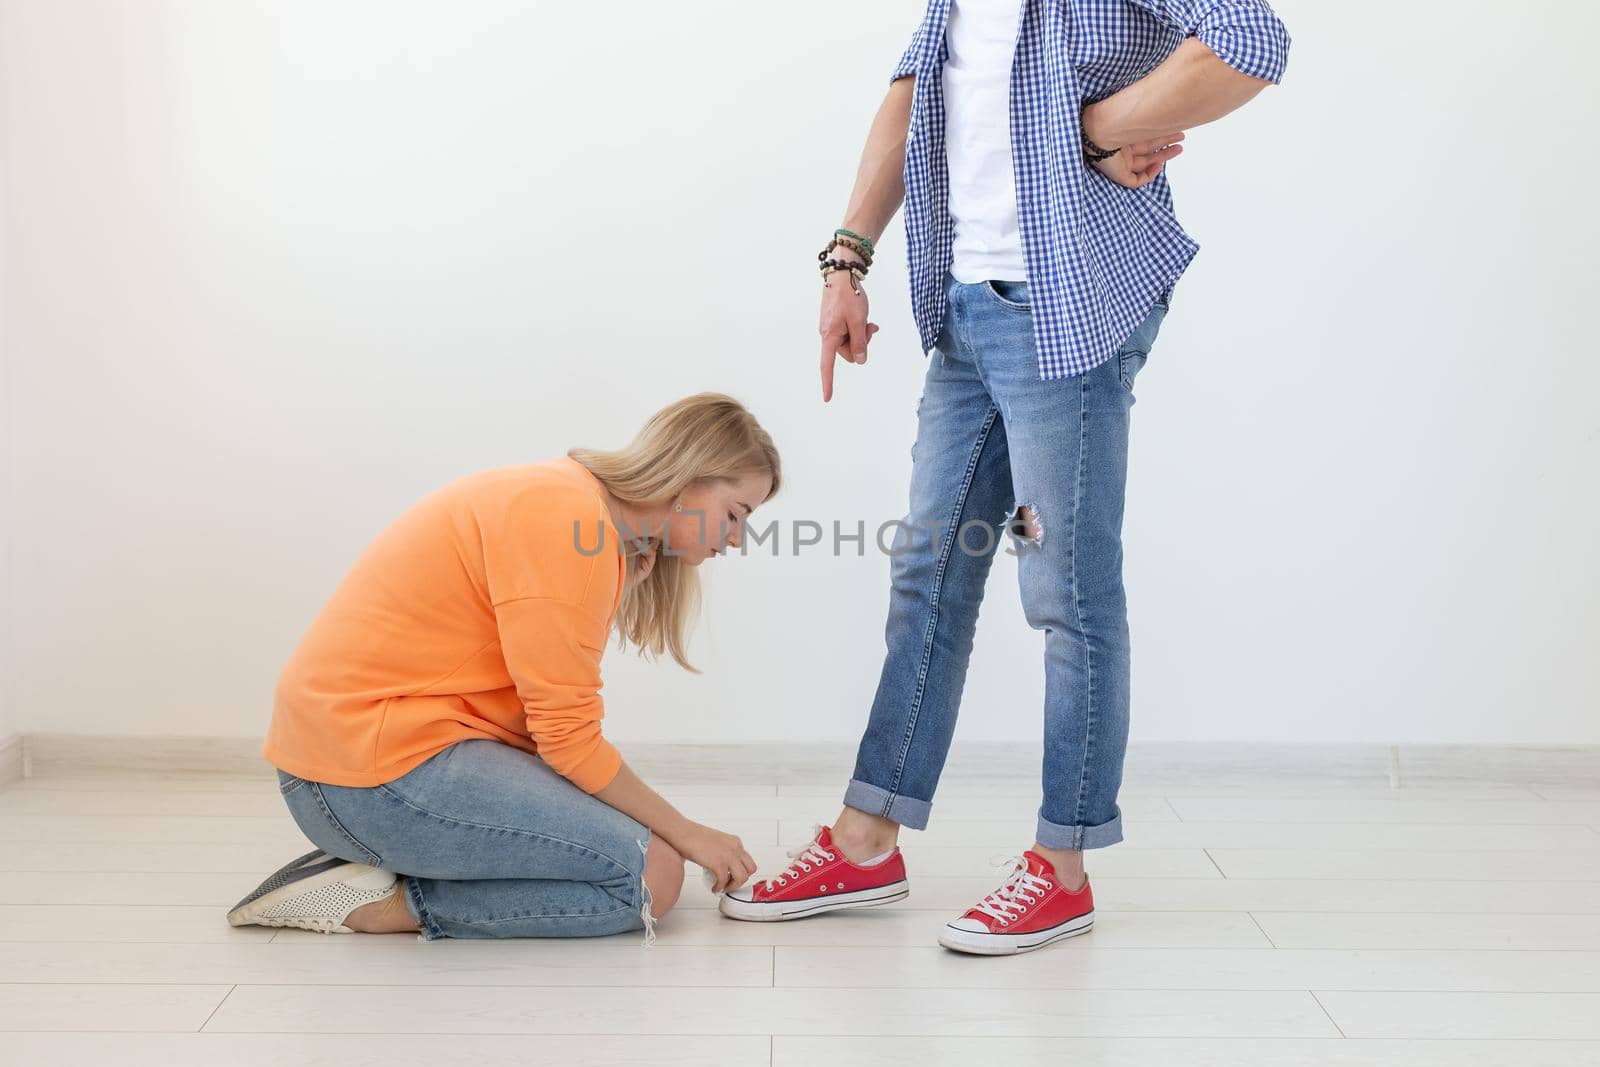 Young pretty blonde girl sits on her lap and touches the shoes of a joyful young man. Concept of unequal relationships and sexism. Copyspace